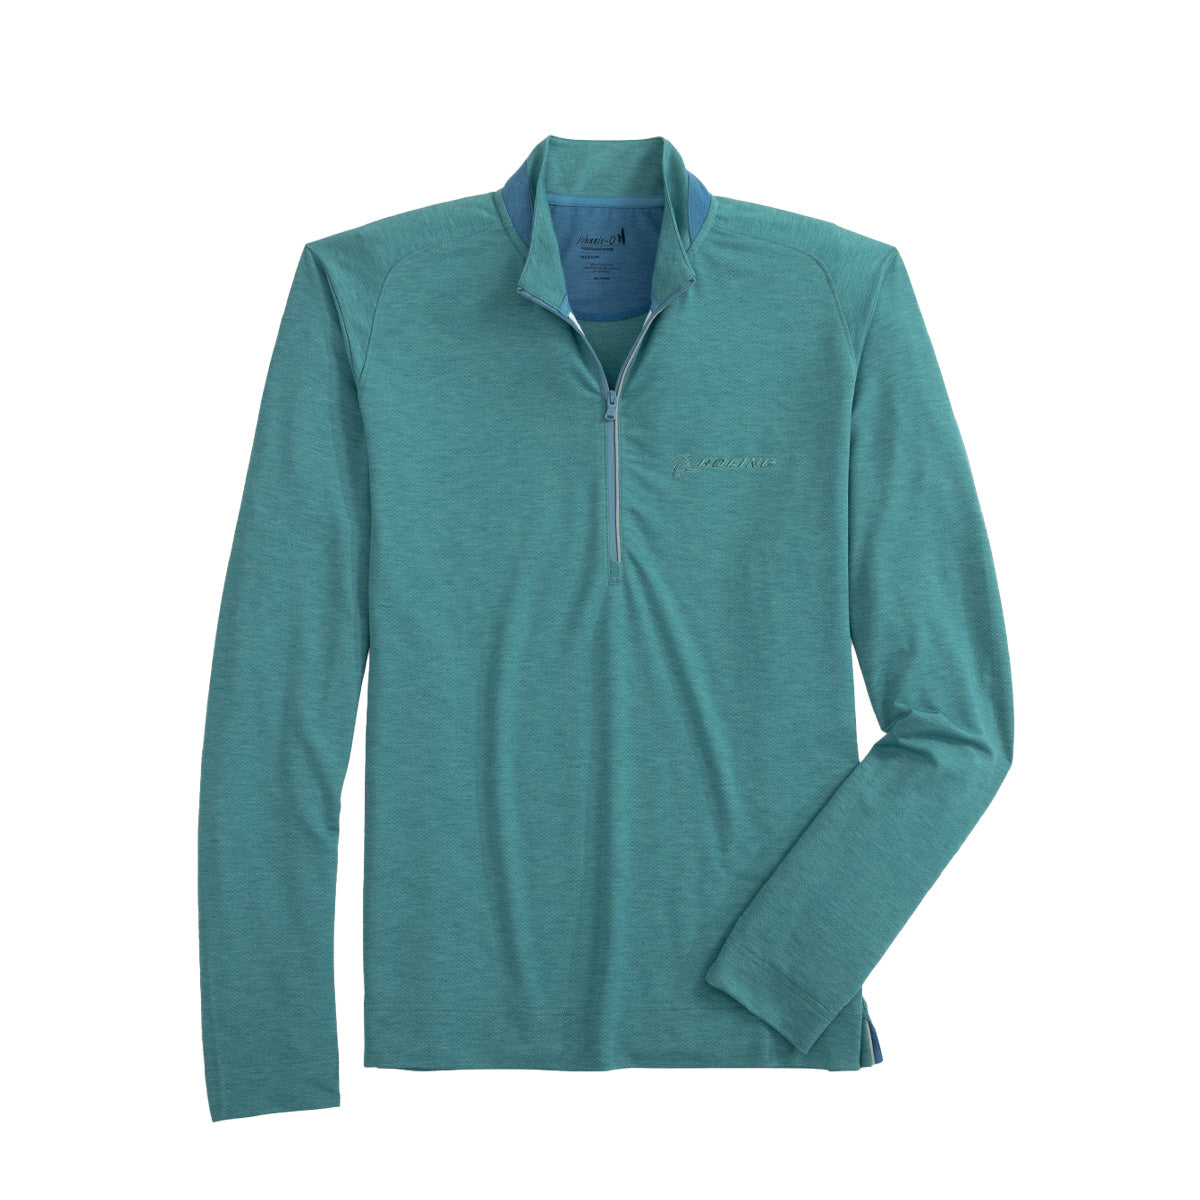 Full product image of the quarter-zip in a green grass color.  Green Boeing logo on left chest.